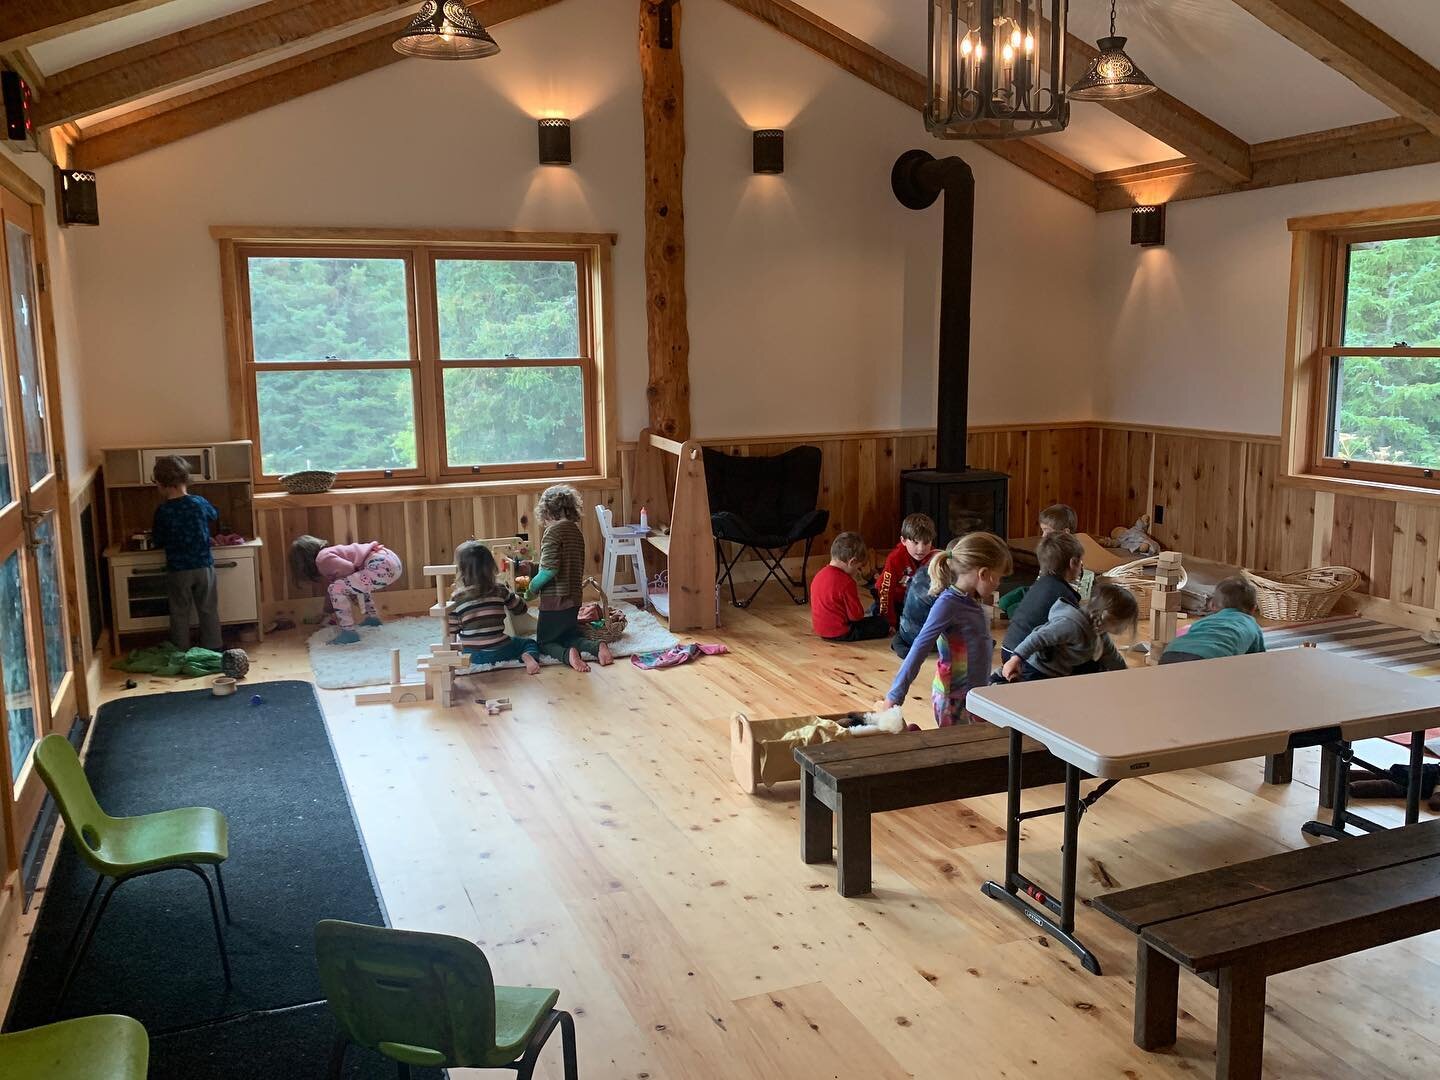 The cozy part of inside time. Yes we do go inside, and we try to make it as home-like and cozy as possible. 🍂

And who doesn&rsquo;t love bare feet and wiggly toes?
#waldorfchildcare #lifewaysnorthamerica